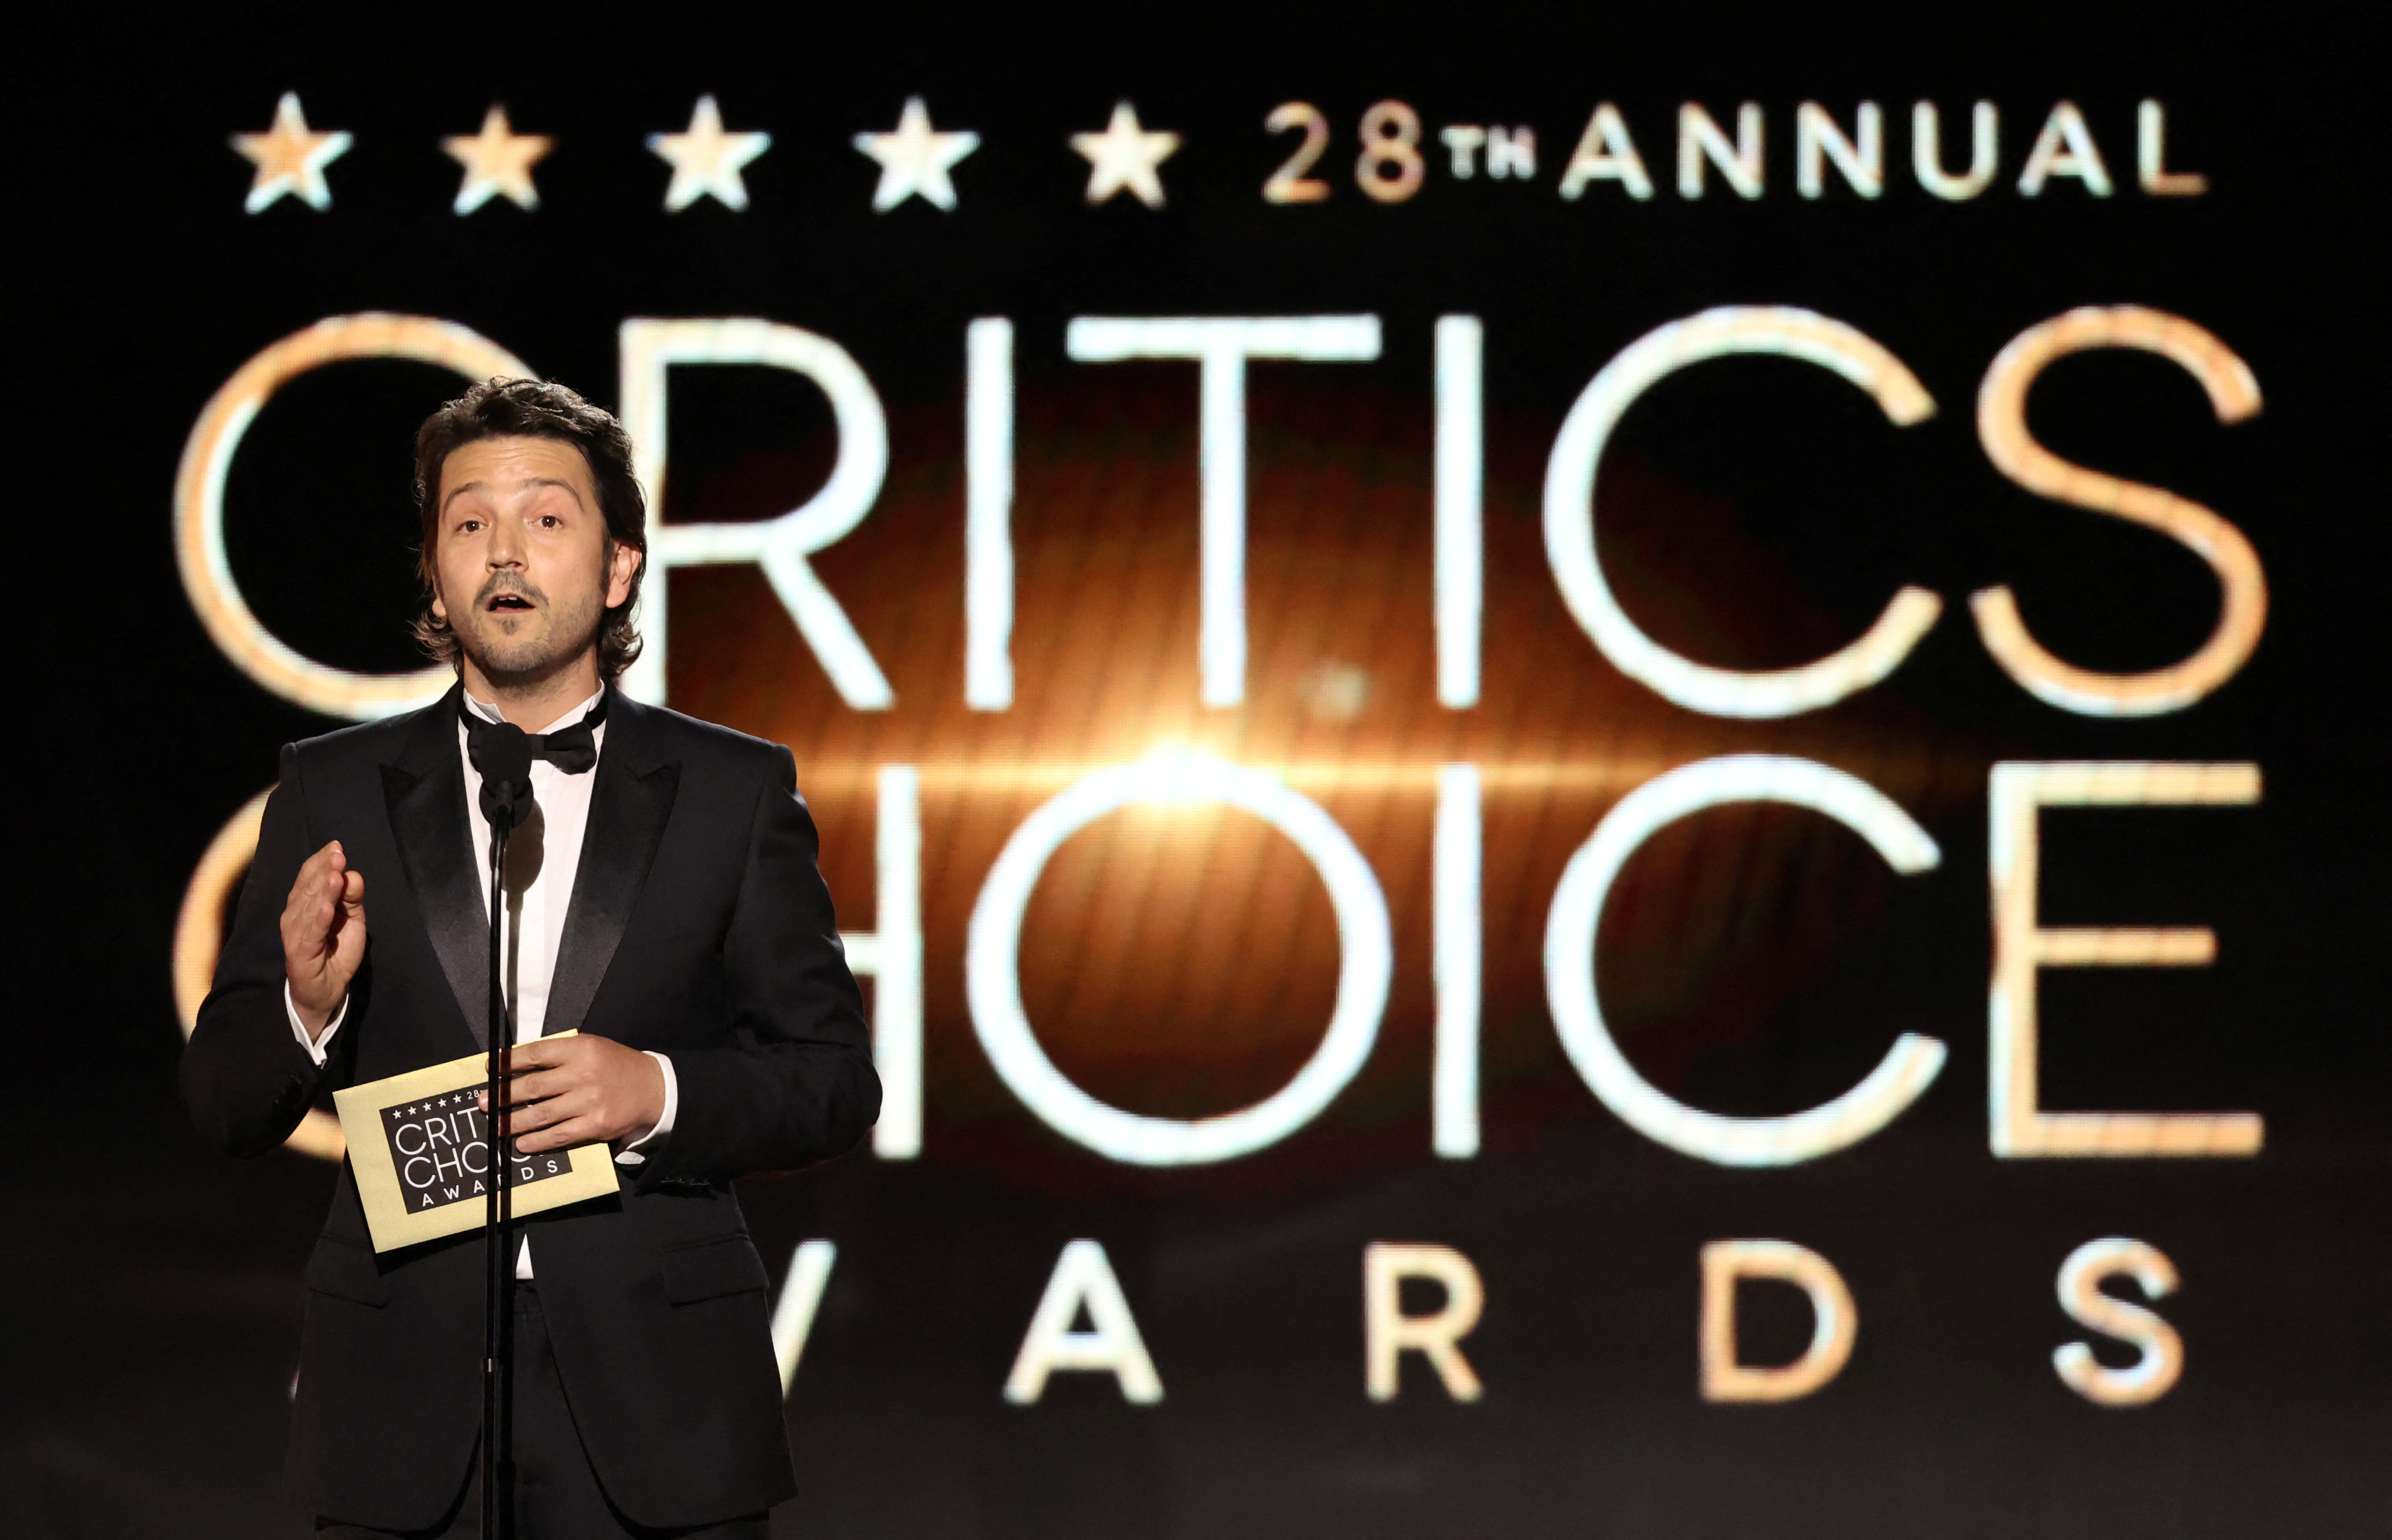 Diego Luna speaks onstage during the 28th annual Critics Choice Awards in Los Angeles, California, U.S., January 15, 2023. REUTERS/Mario Anzuoni